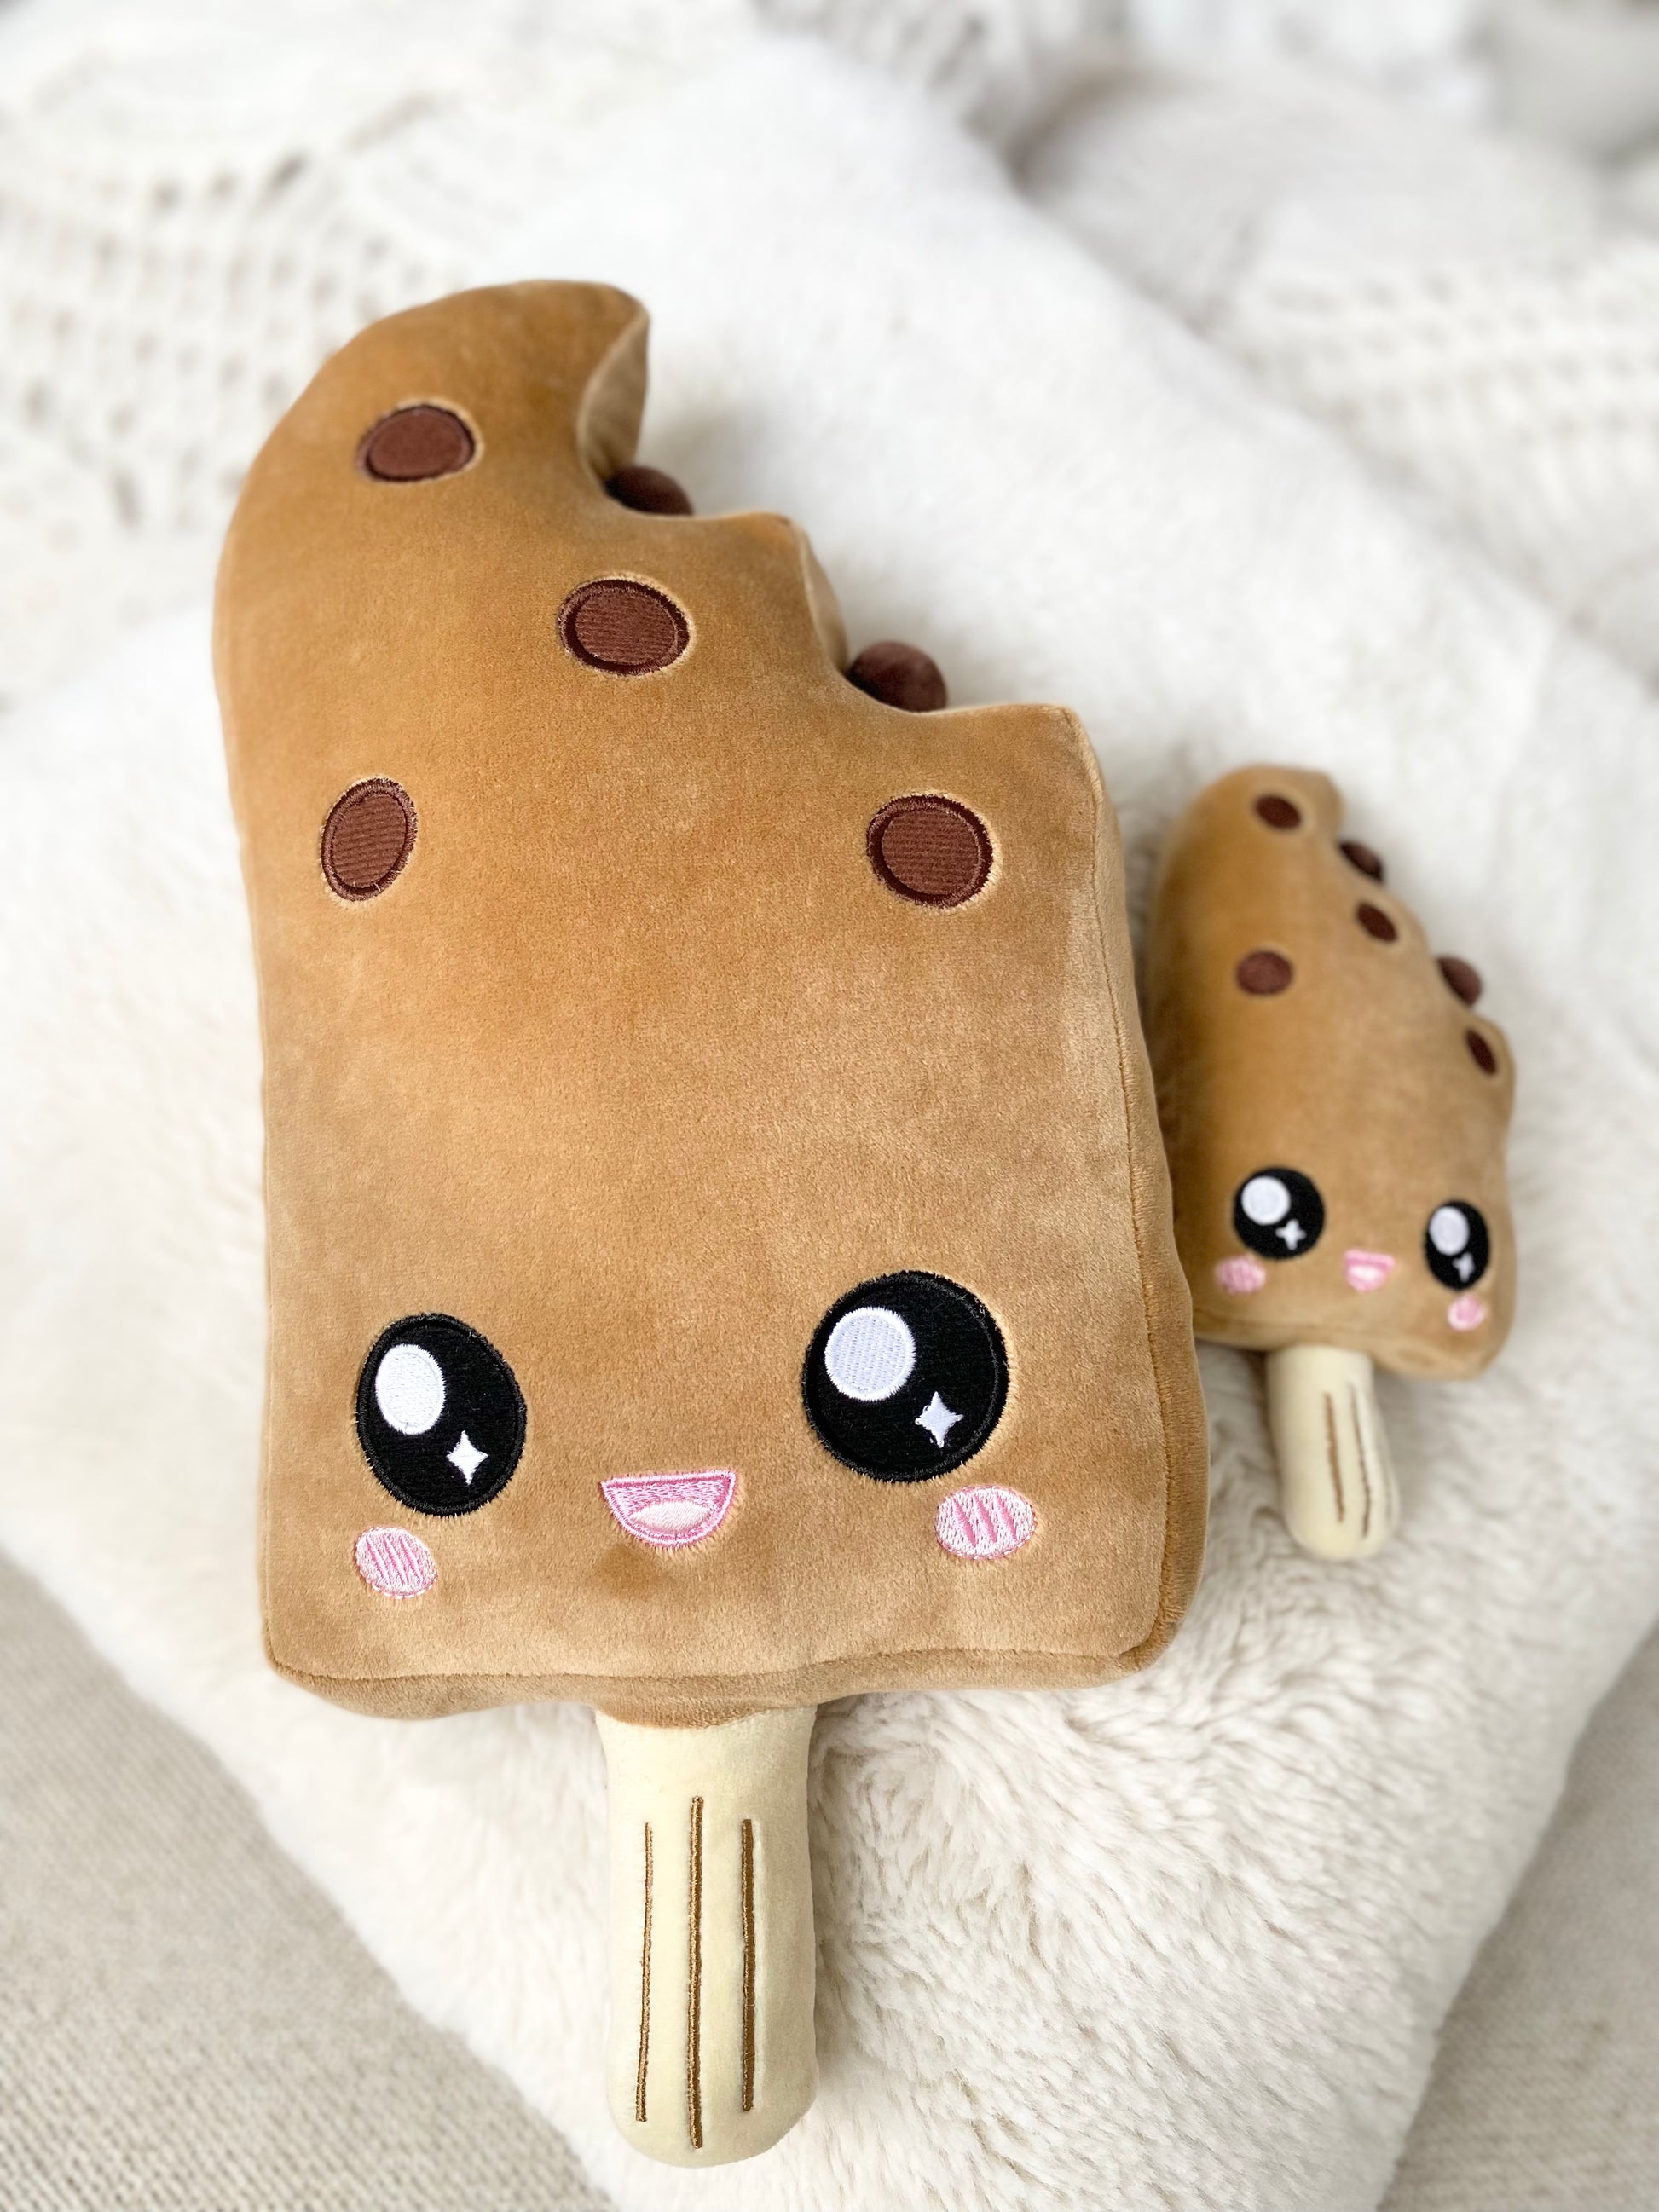 Plush toy of a boba ice cream bar with a cute open-mouth smiling face lying next to a miniature version of itself on a fluffy white pillow.